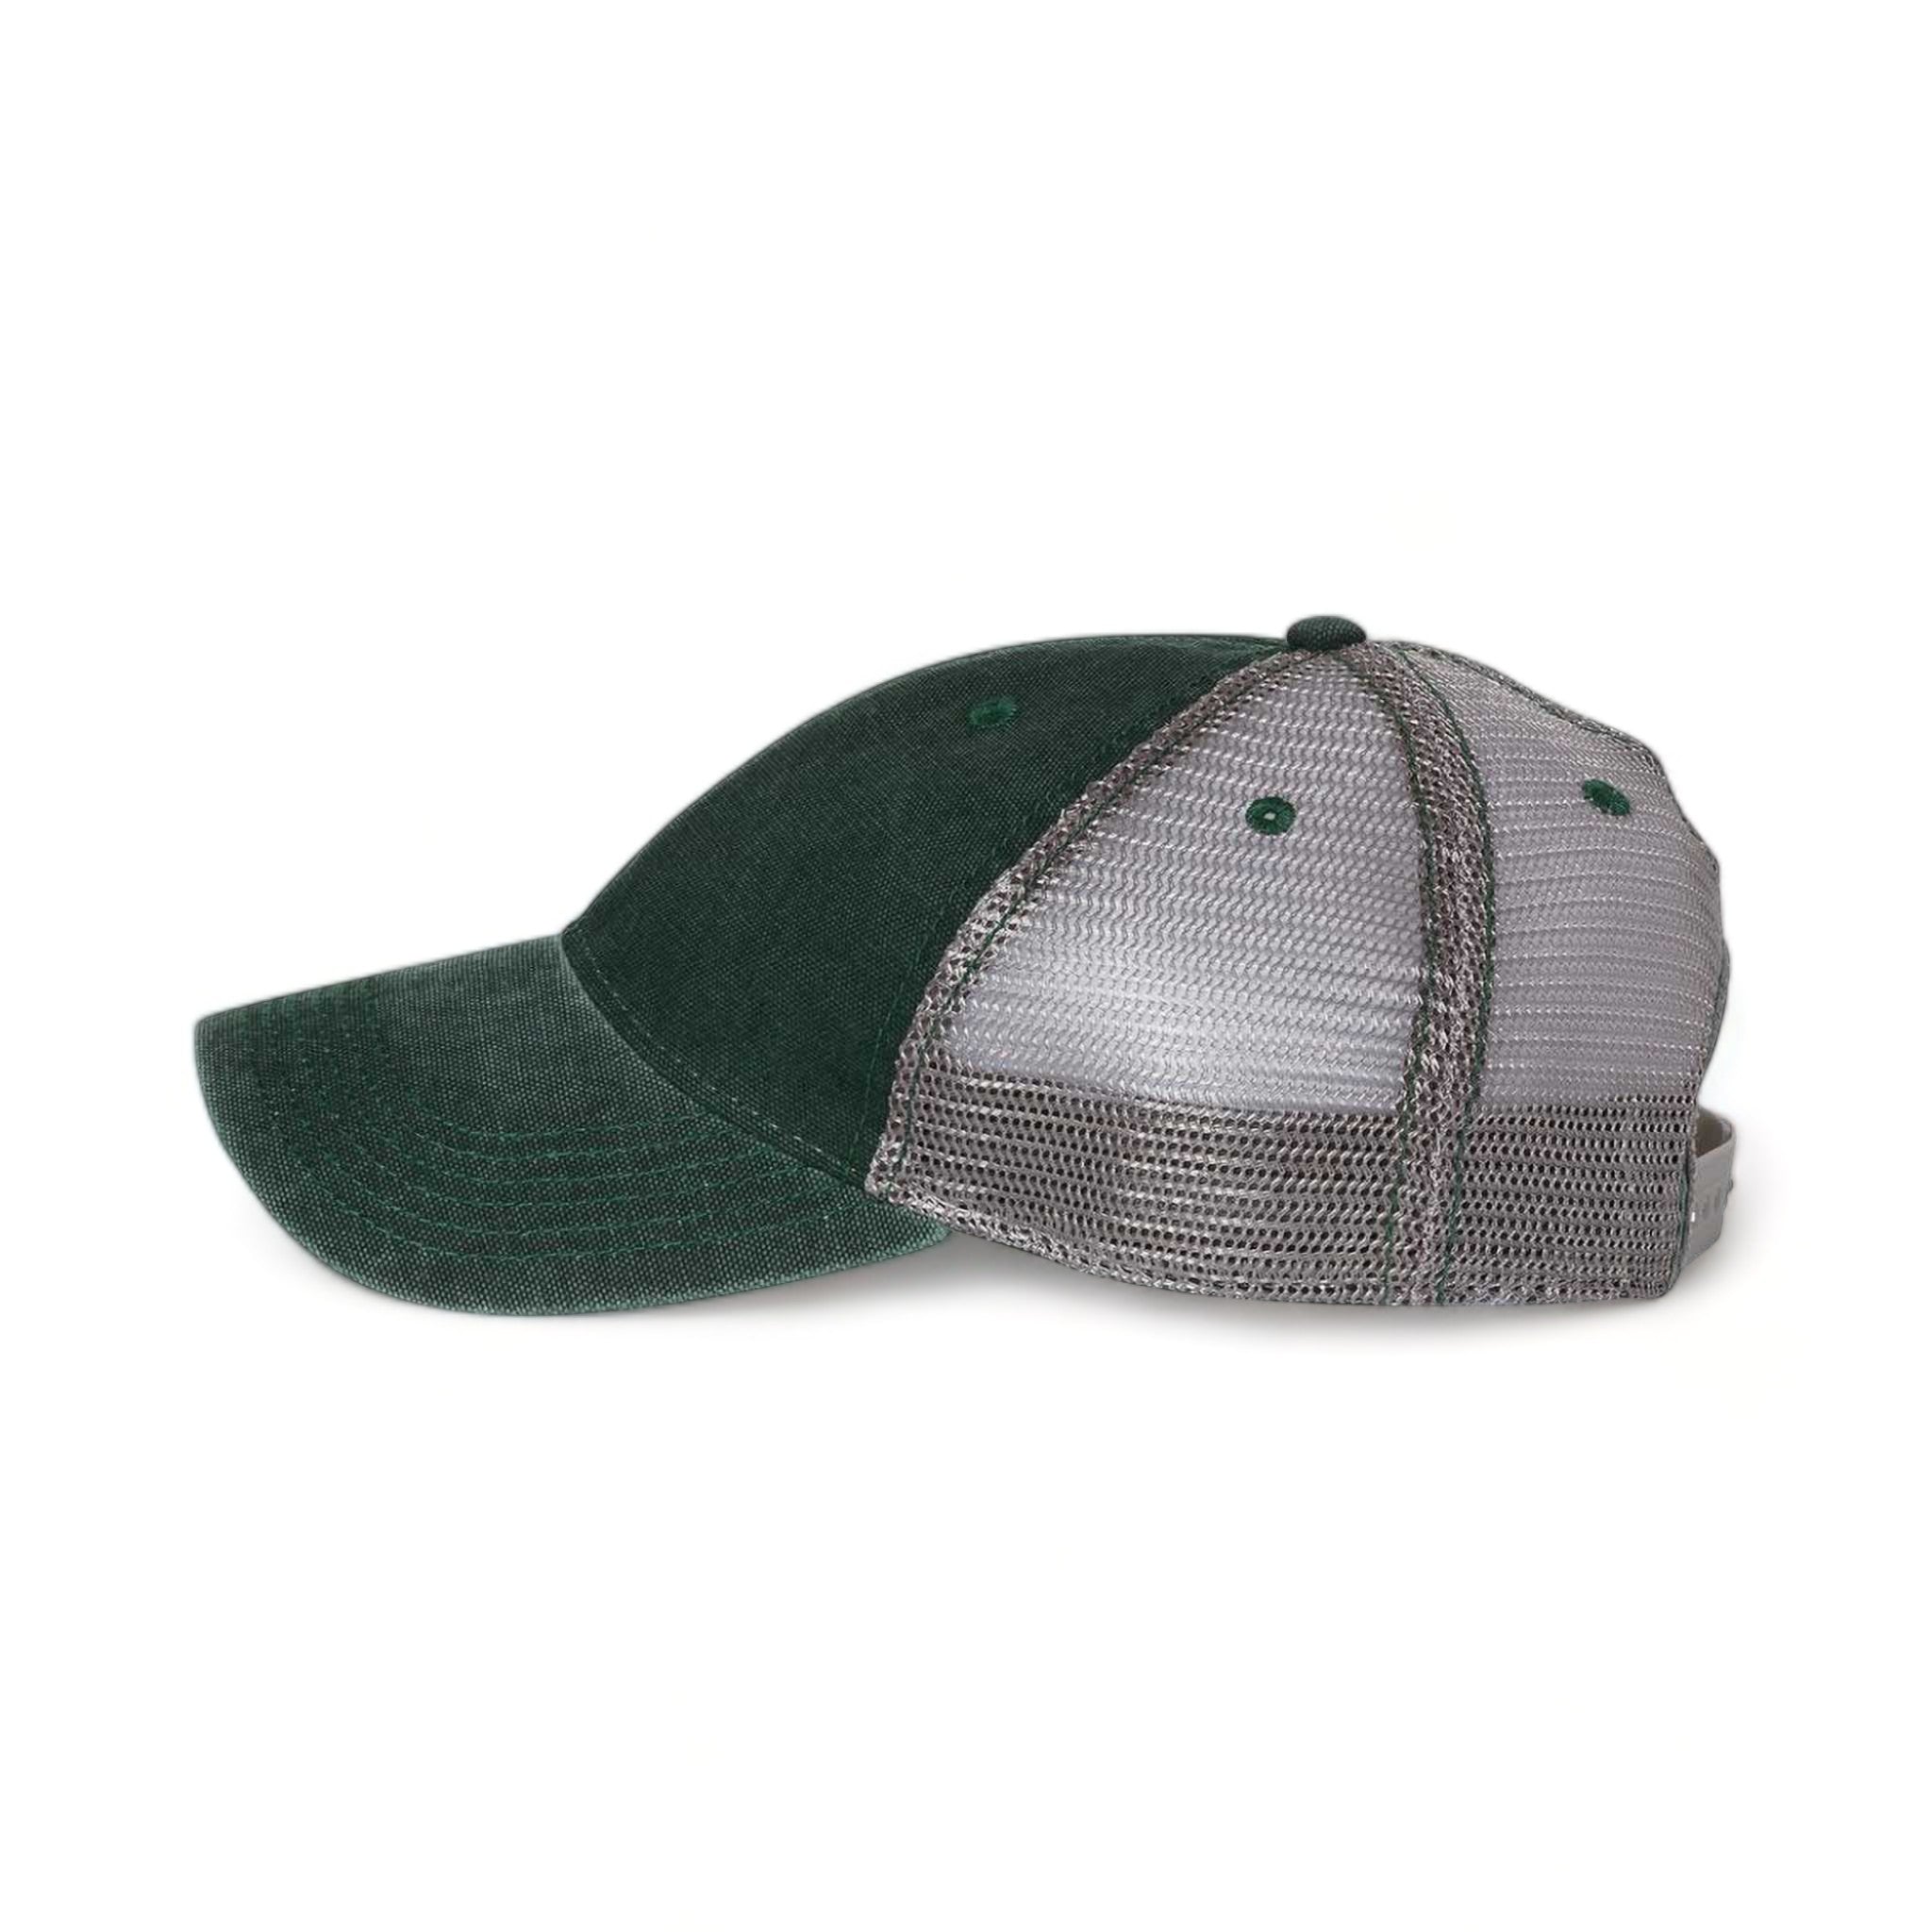 Side view of LEGACY DTA custom hat in dark green and grey